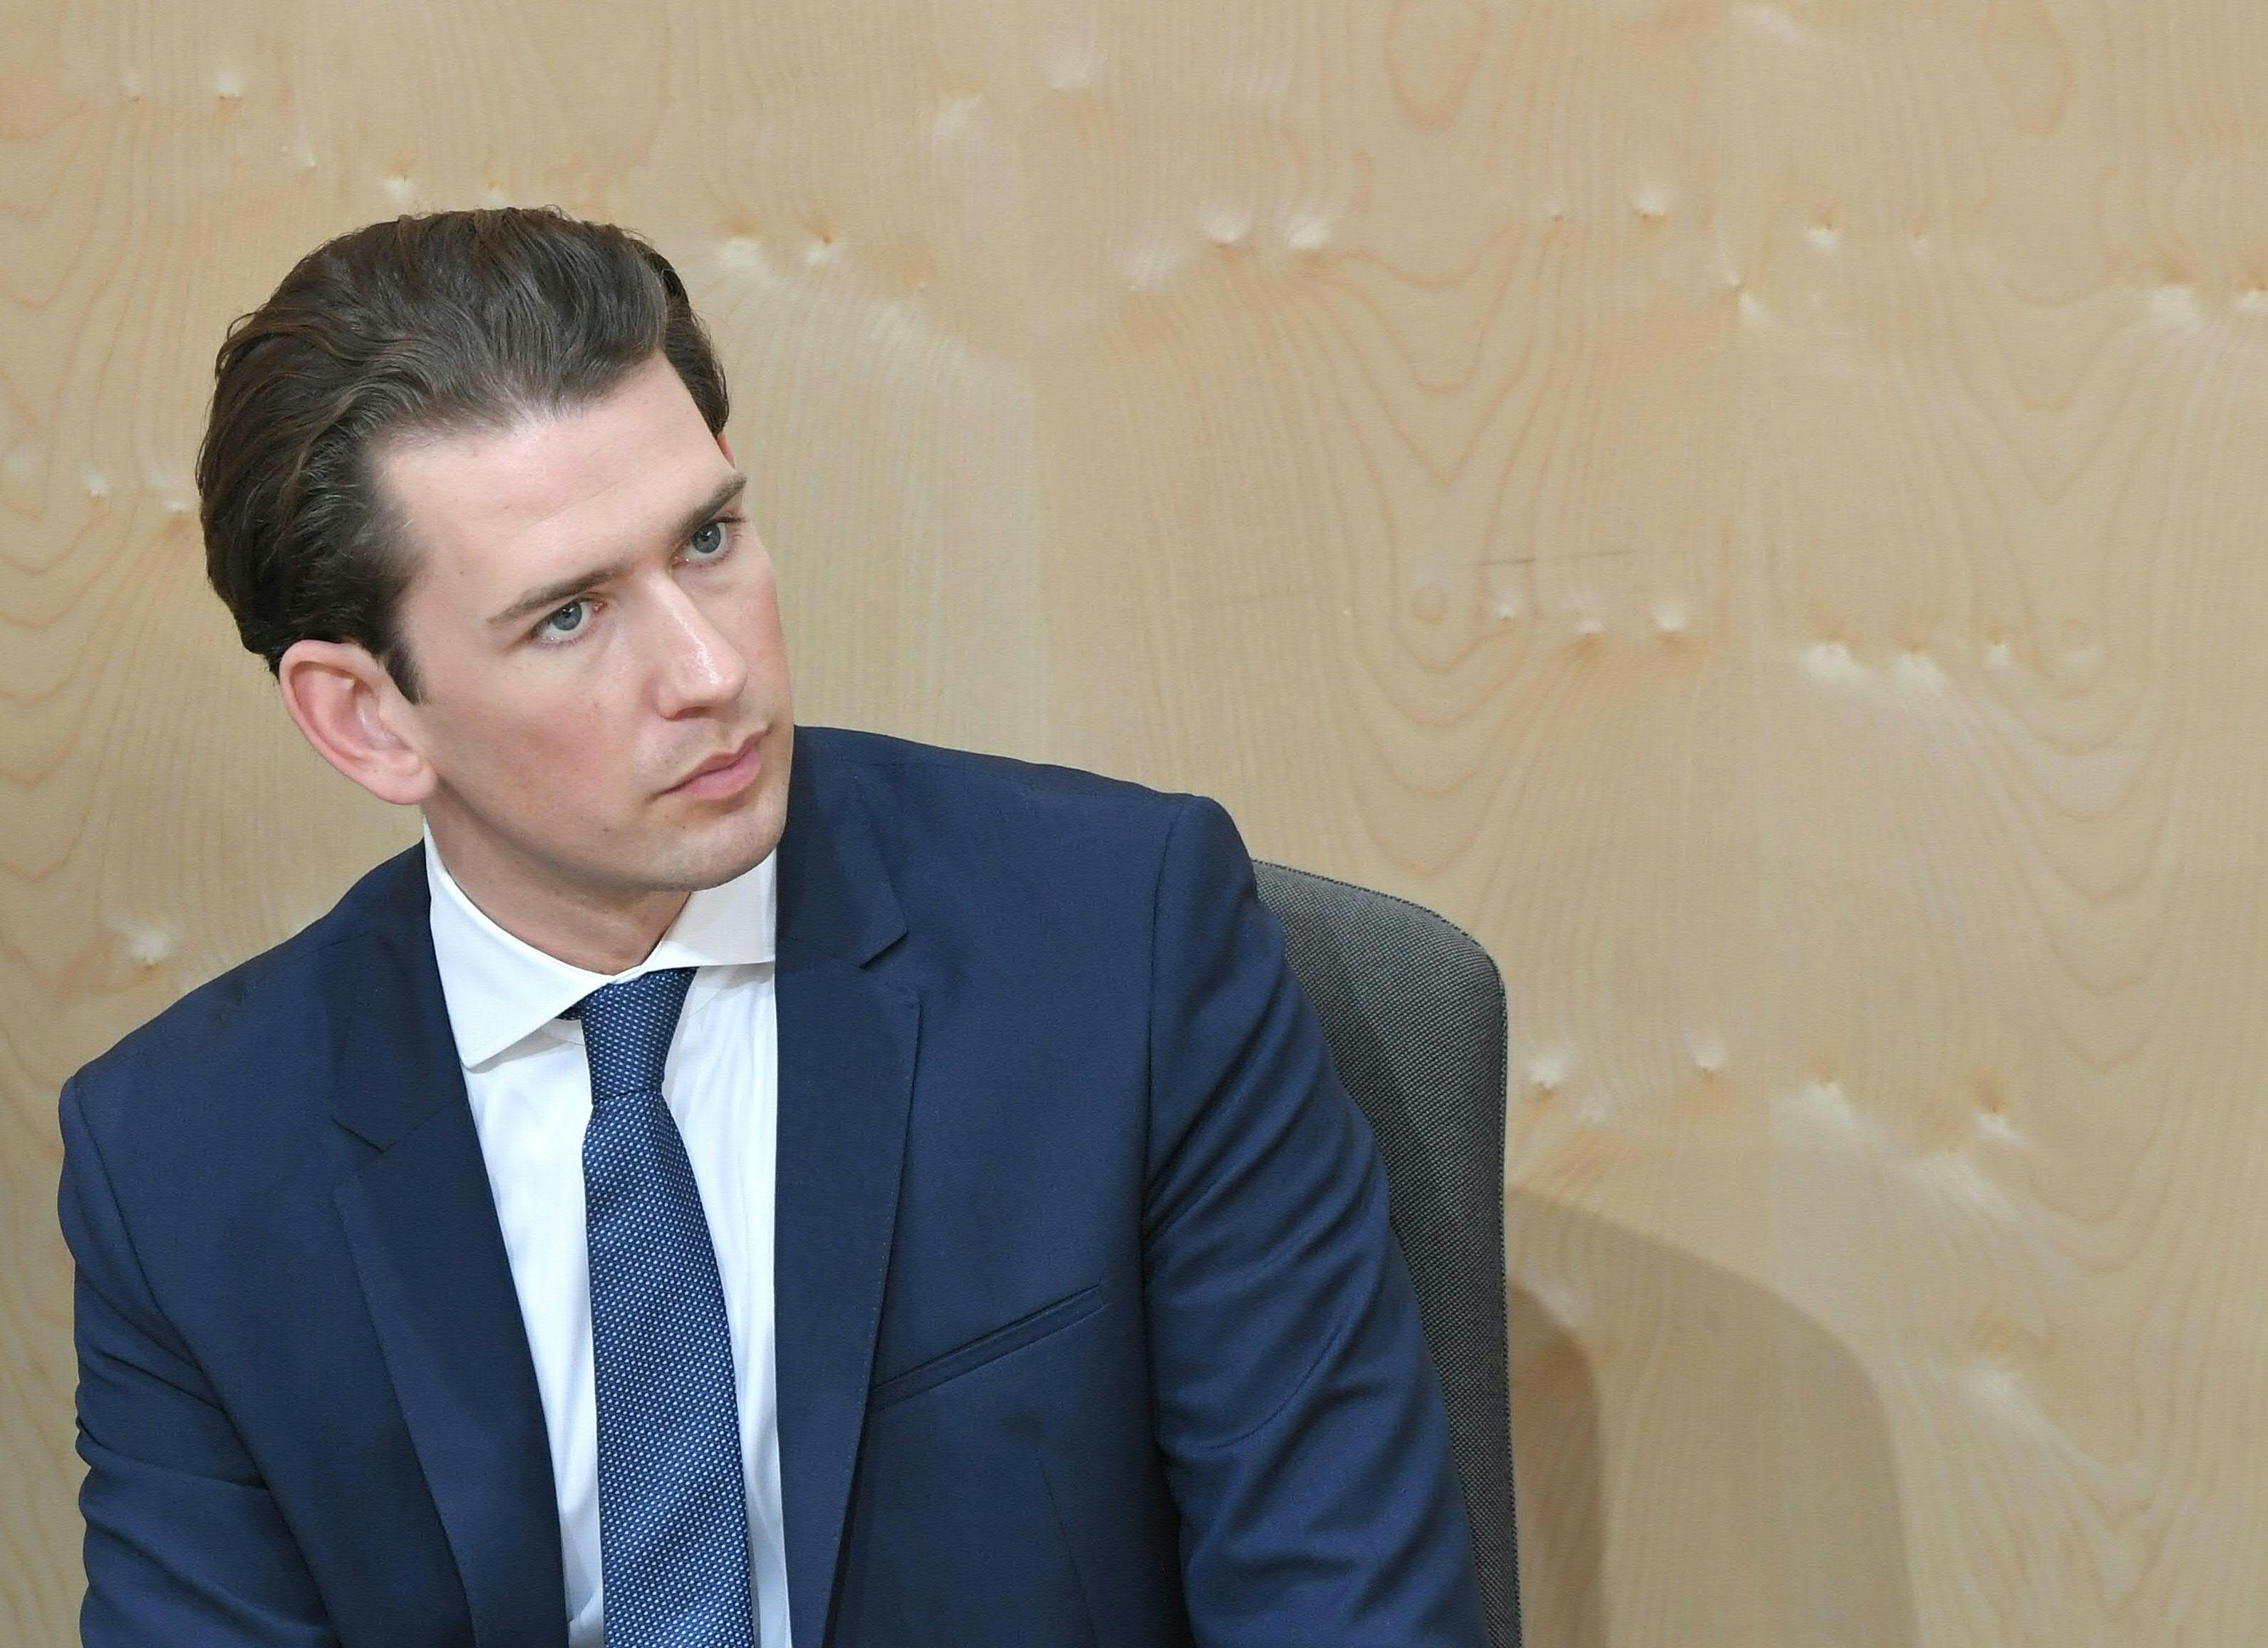 Austria's Chancellor Sebastian Kurz attends a special session of the parliament focusing on a no-confidence vote against him on May 27, 2019 in Vienna.